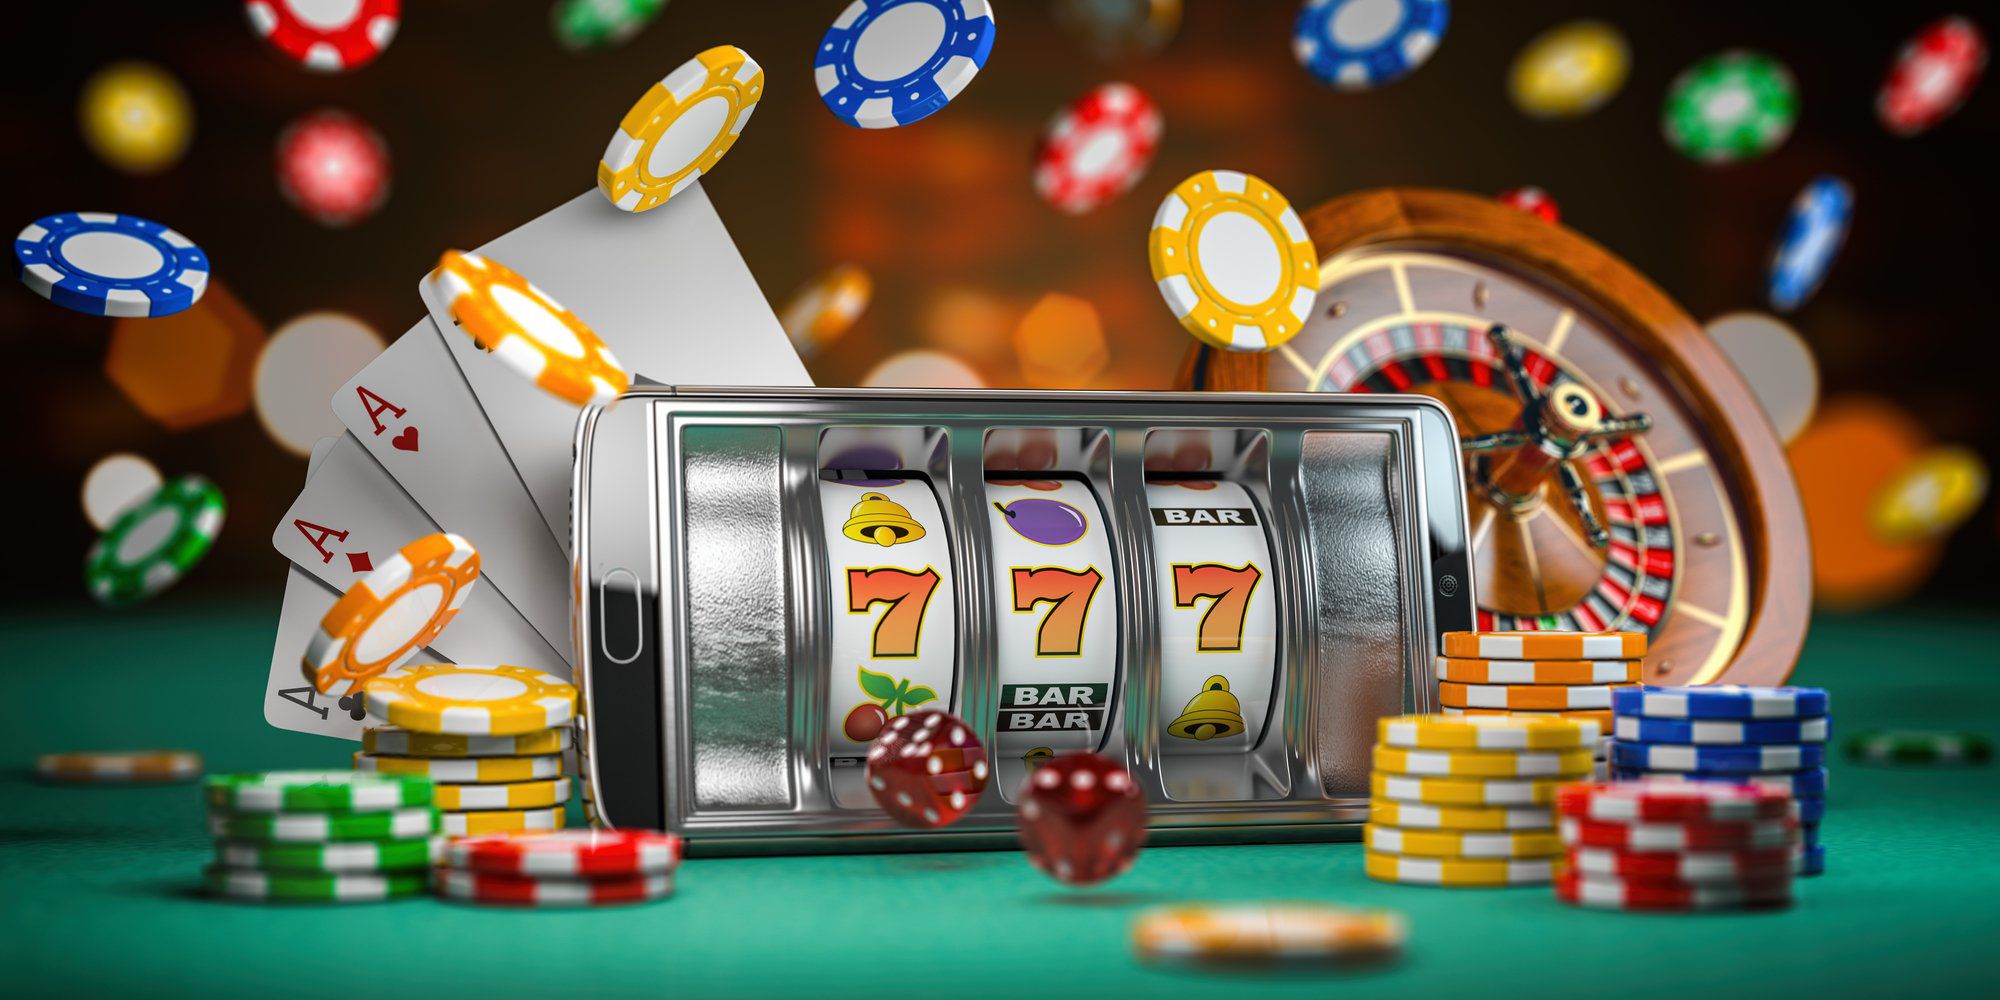 What casino game can you win at?